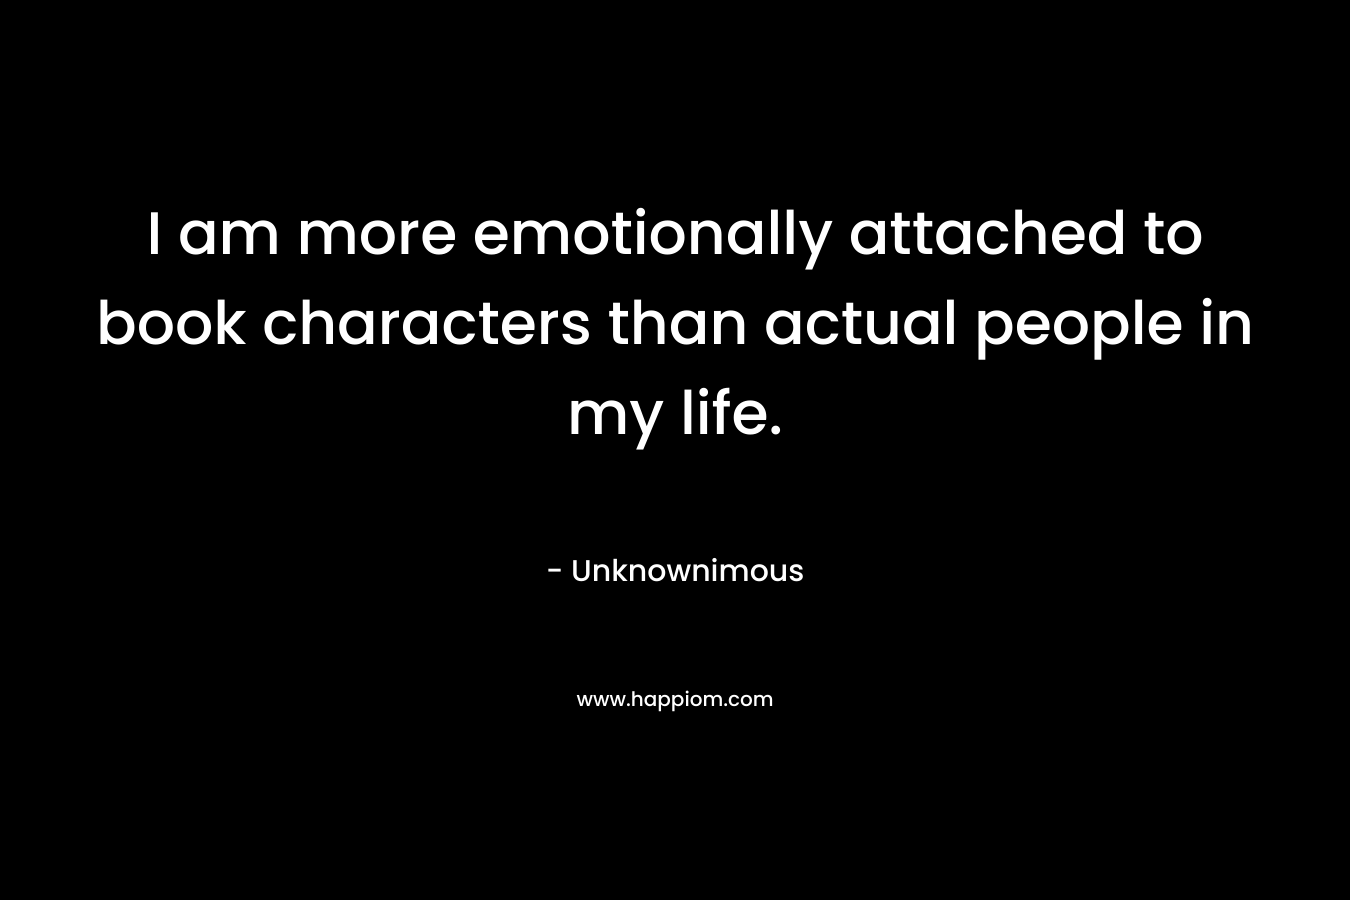 I am more emotionally attached to book characters than actual people in my life. – Unknownimous